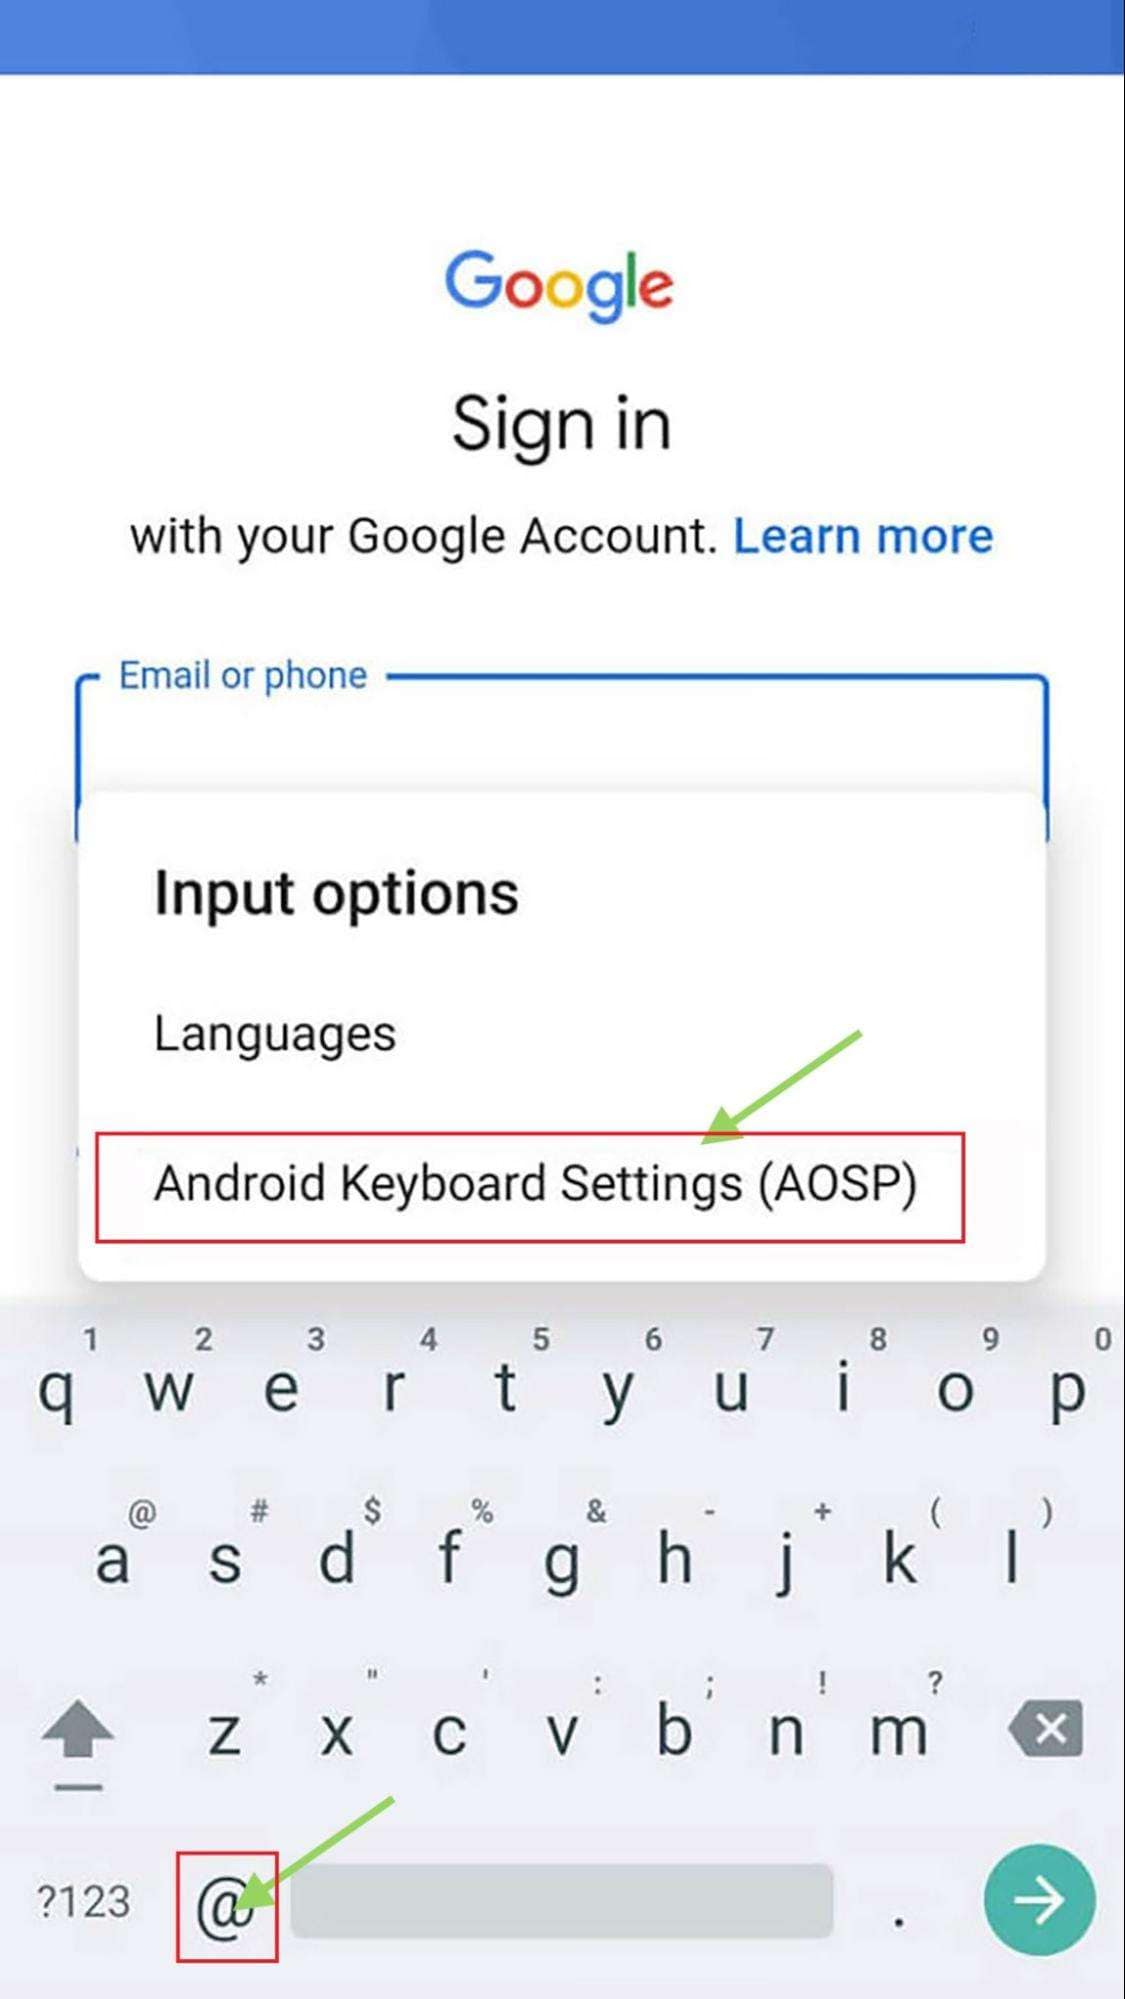 Open Android keyboard settings.